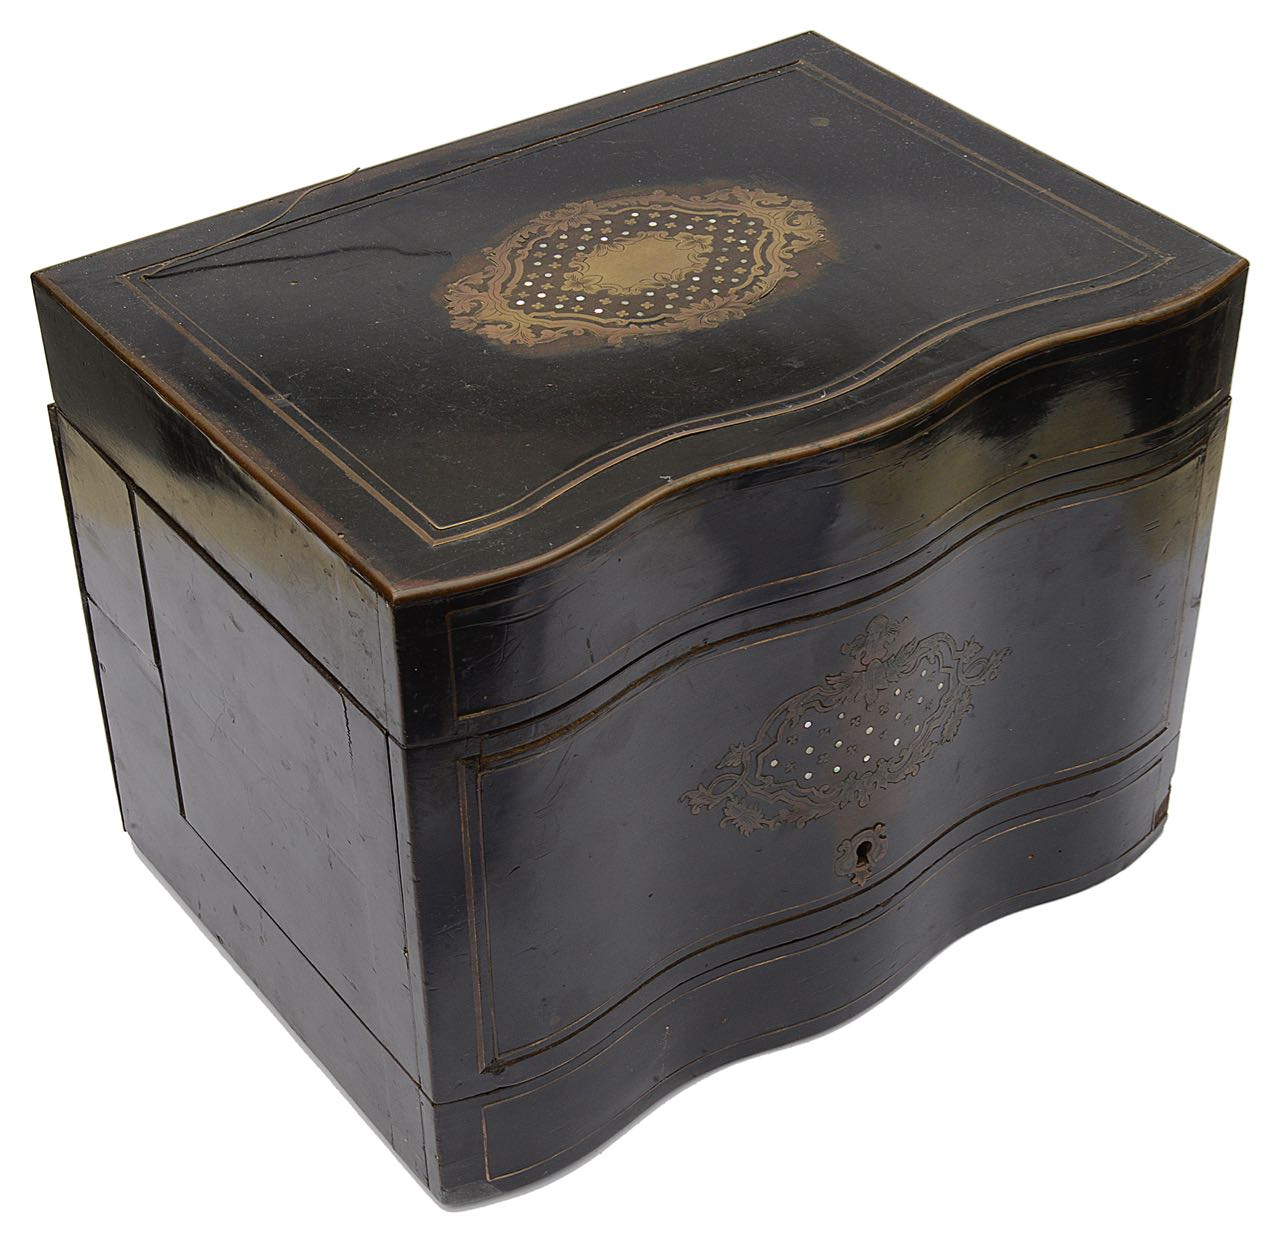 A 19th c. Fr. ebonised brass and mother of pearl inlaid decanter box,